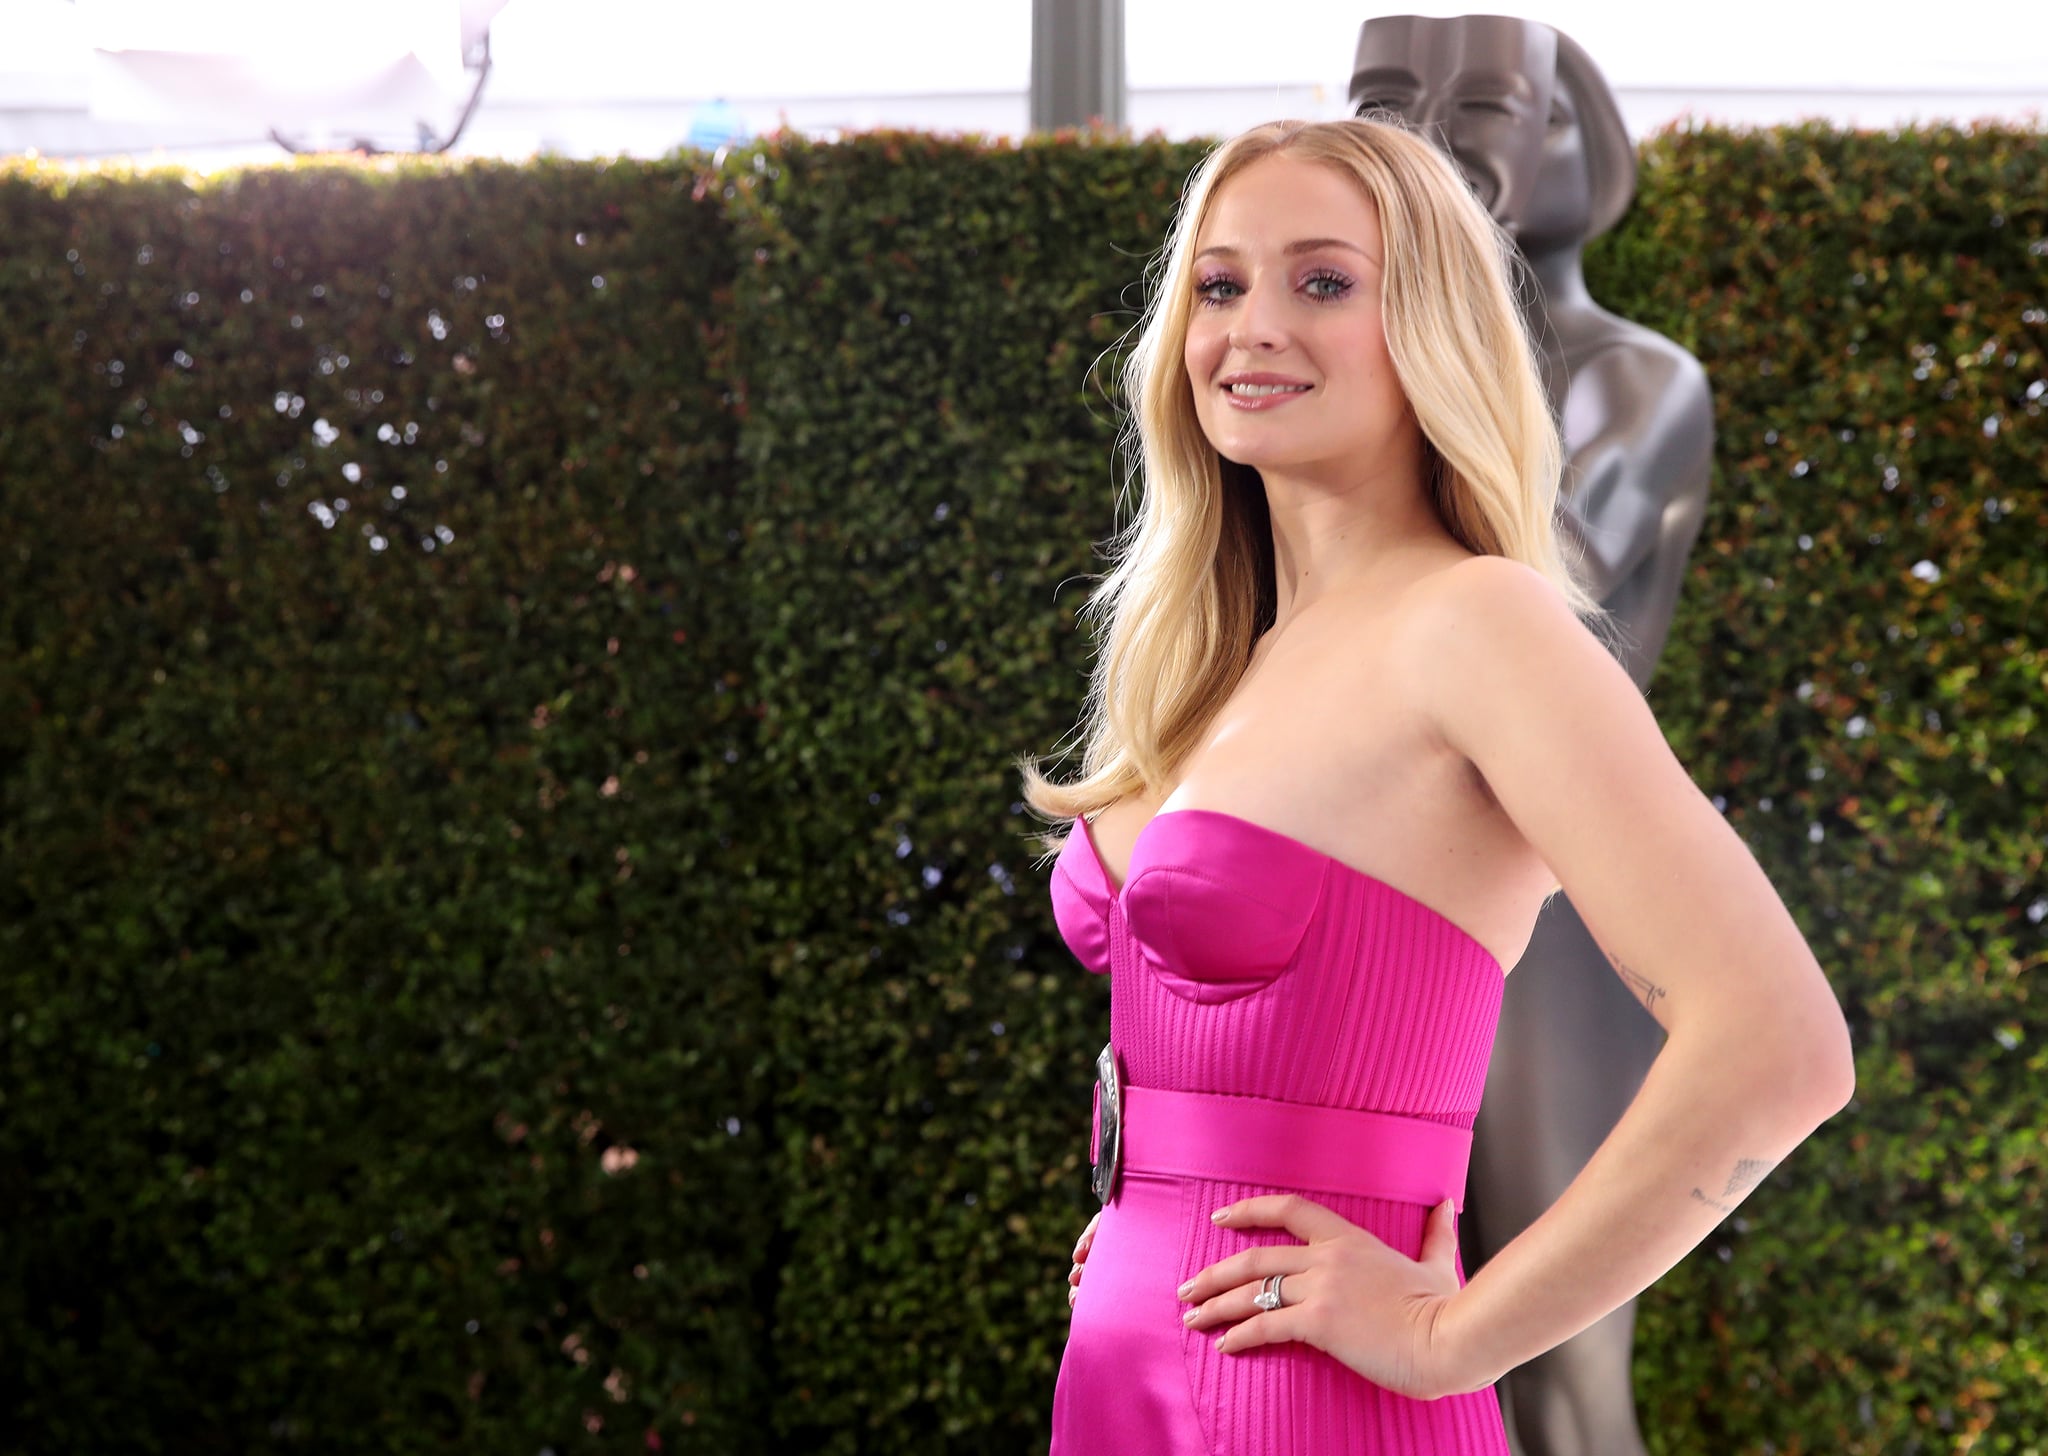 Fashion, Shopping & Style, I'm Not Even Looking at Joe Jonas in His Tux  When Sophie Turner Is Wearing This Hot Pink Gown